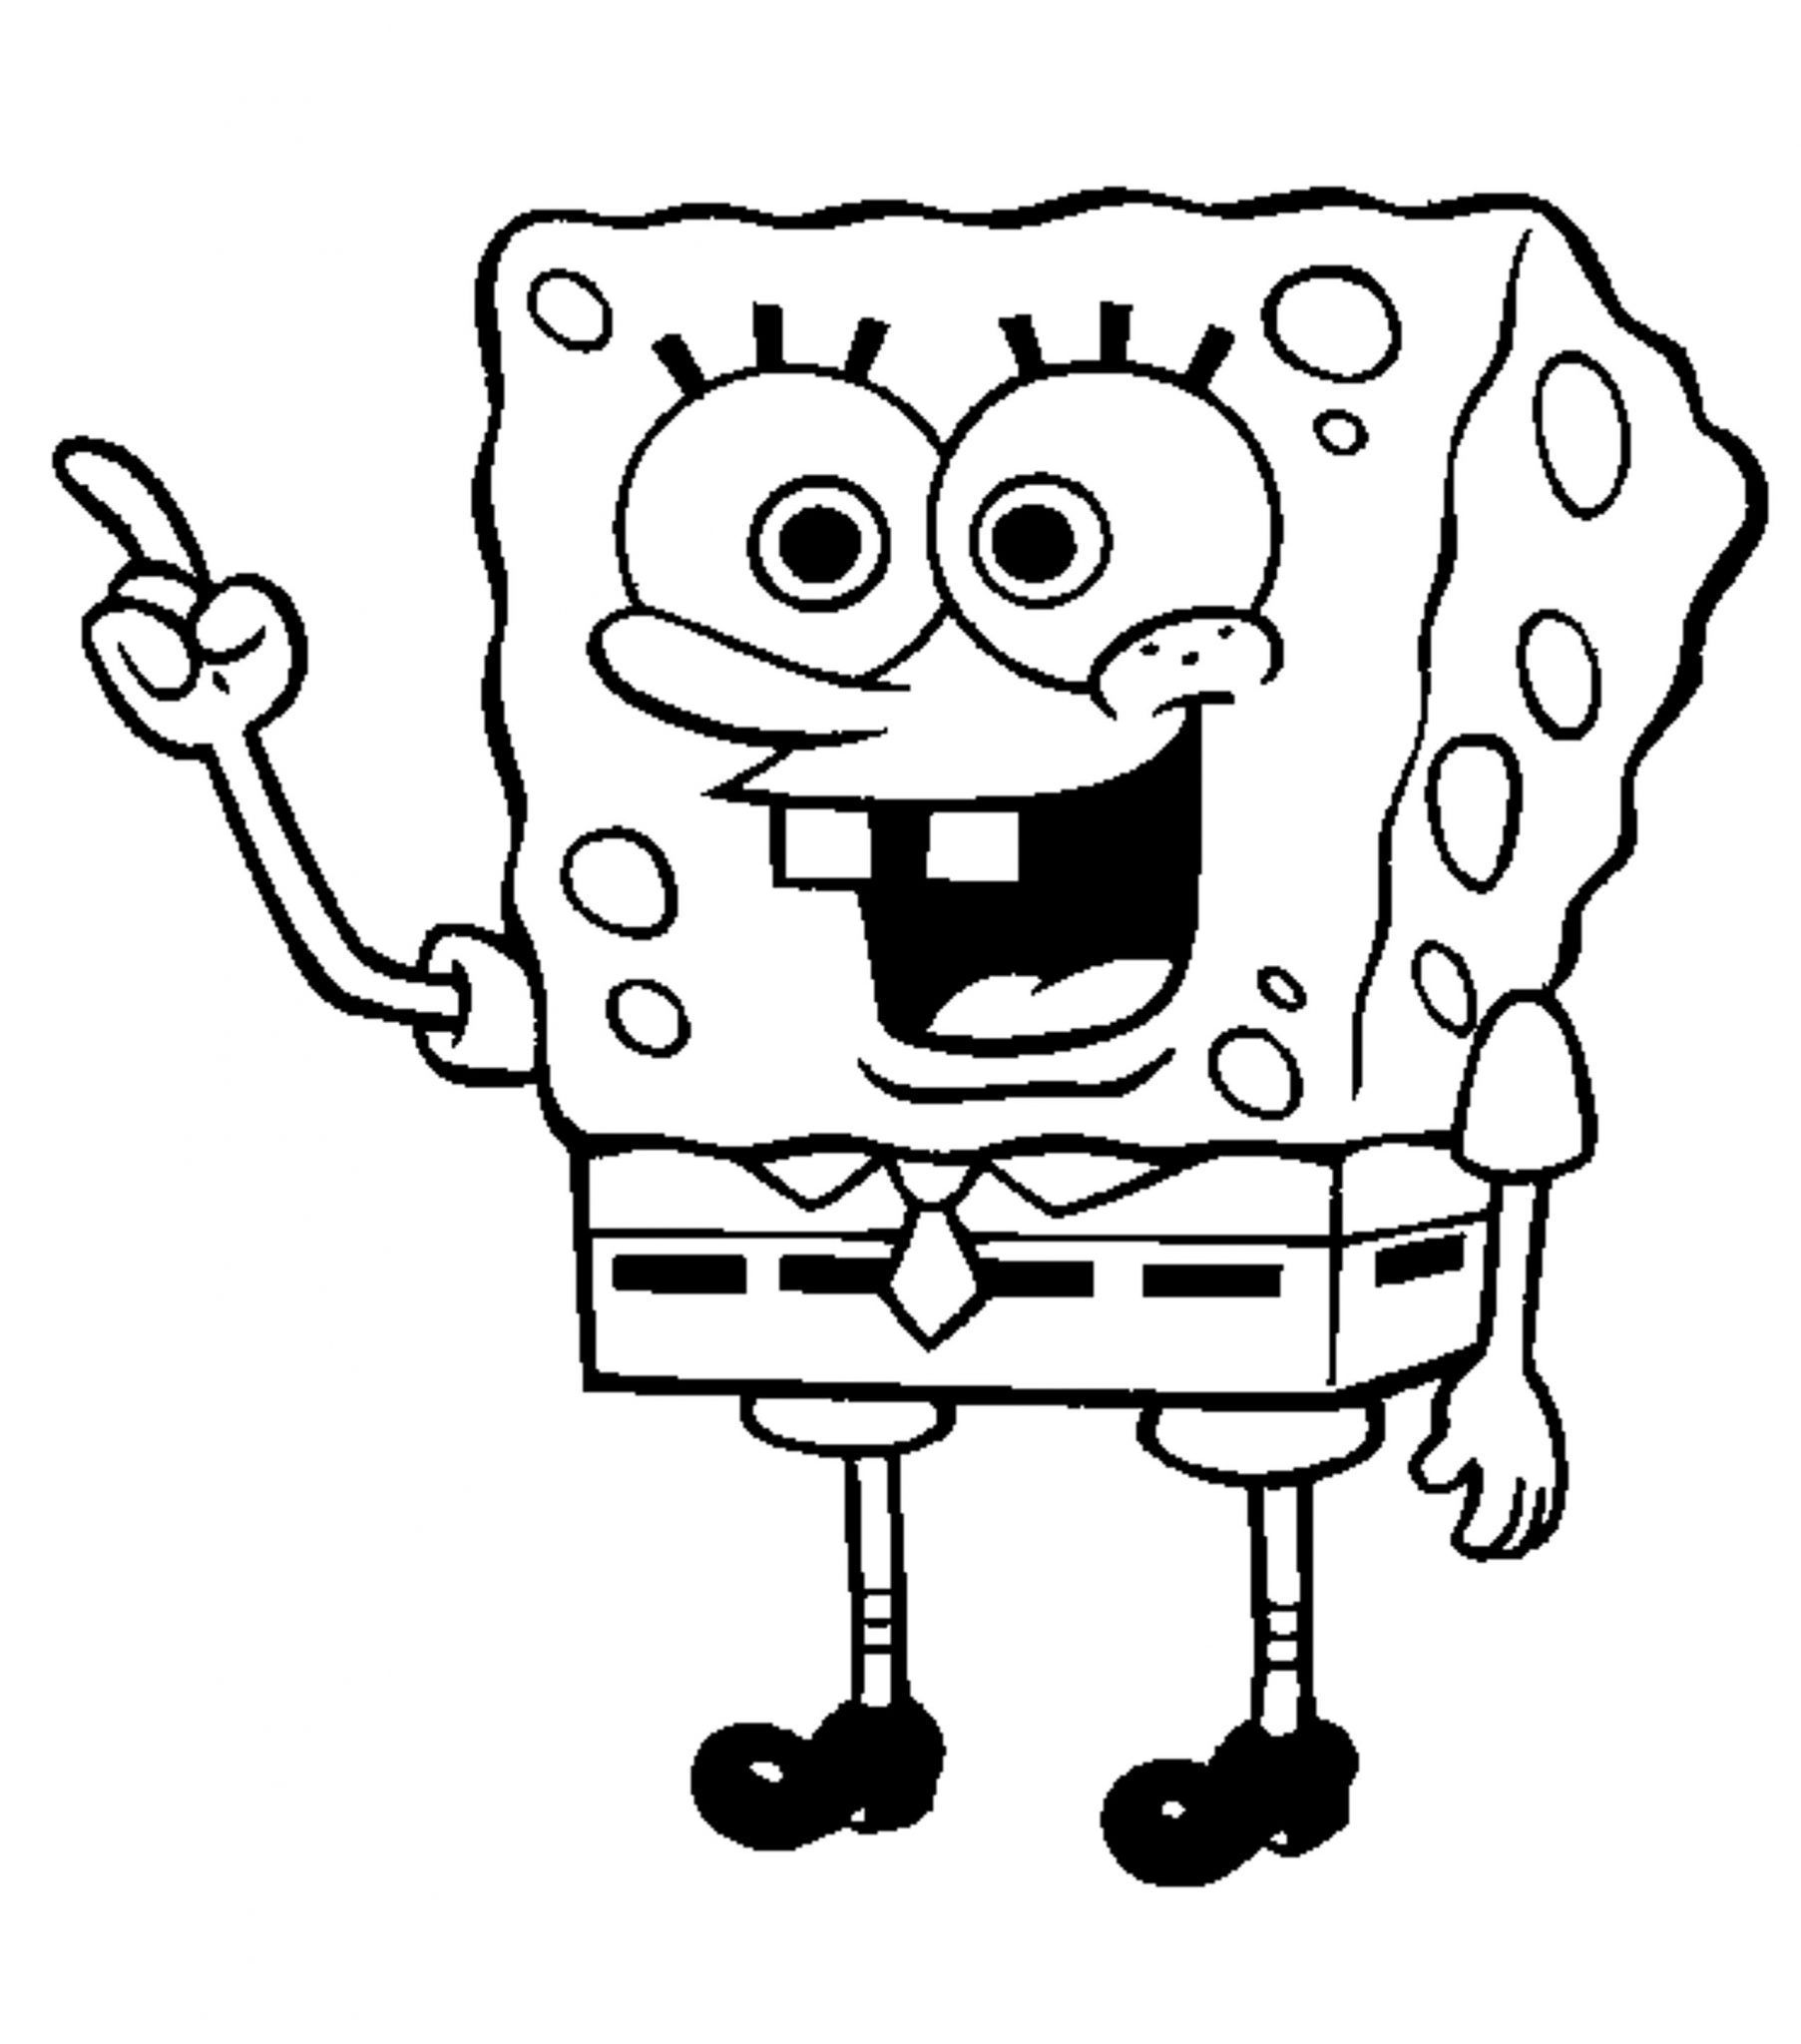 Print Download Choosing Spongebob Coloring Pages For Your Children